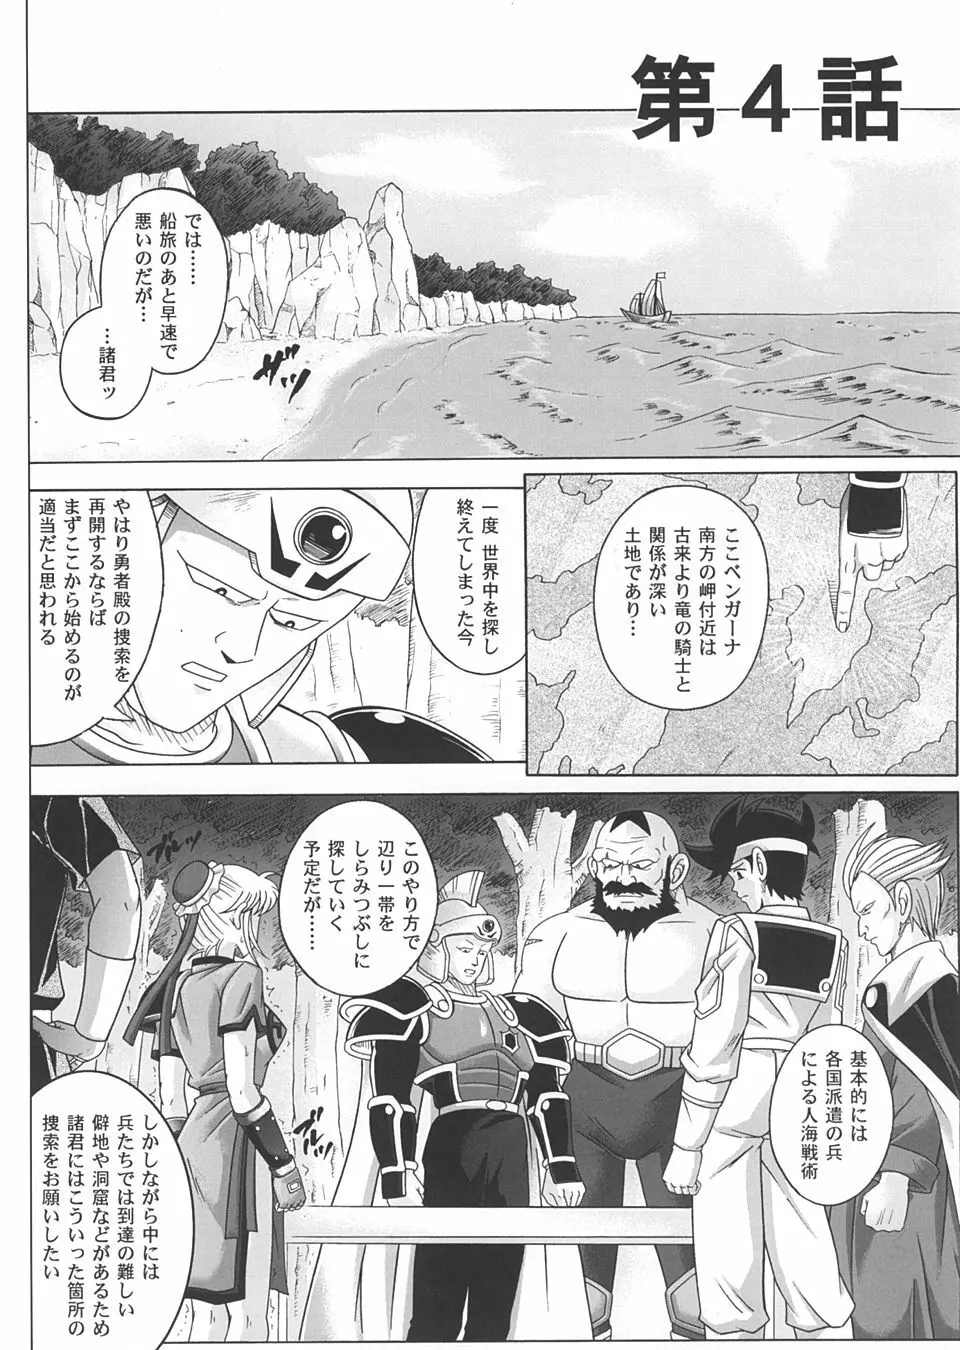 Sinclair 2 & Extra -シンクレア2- - page25